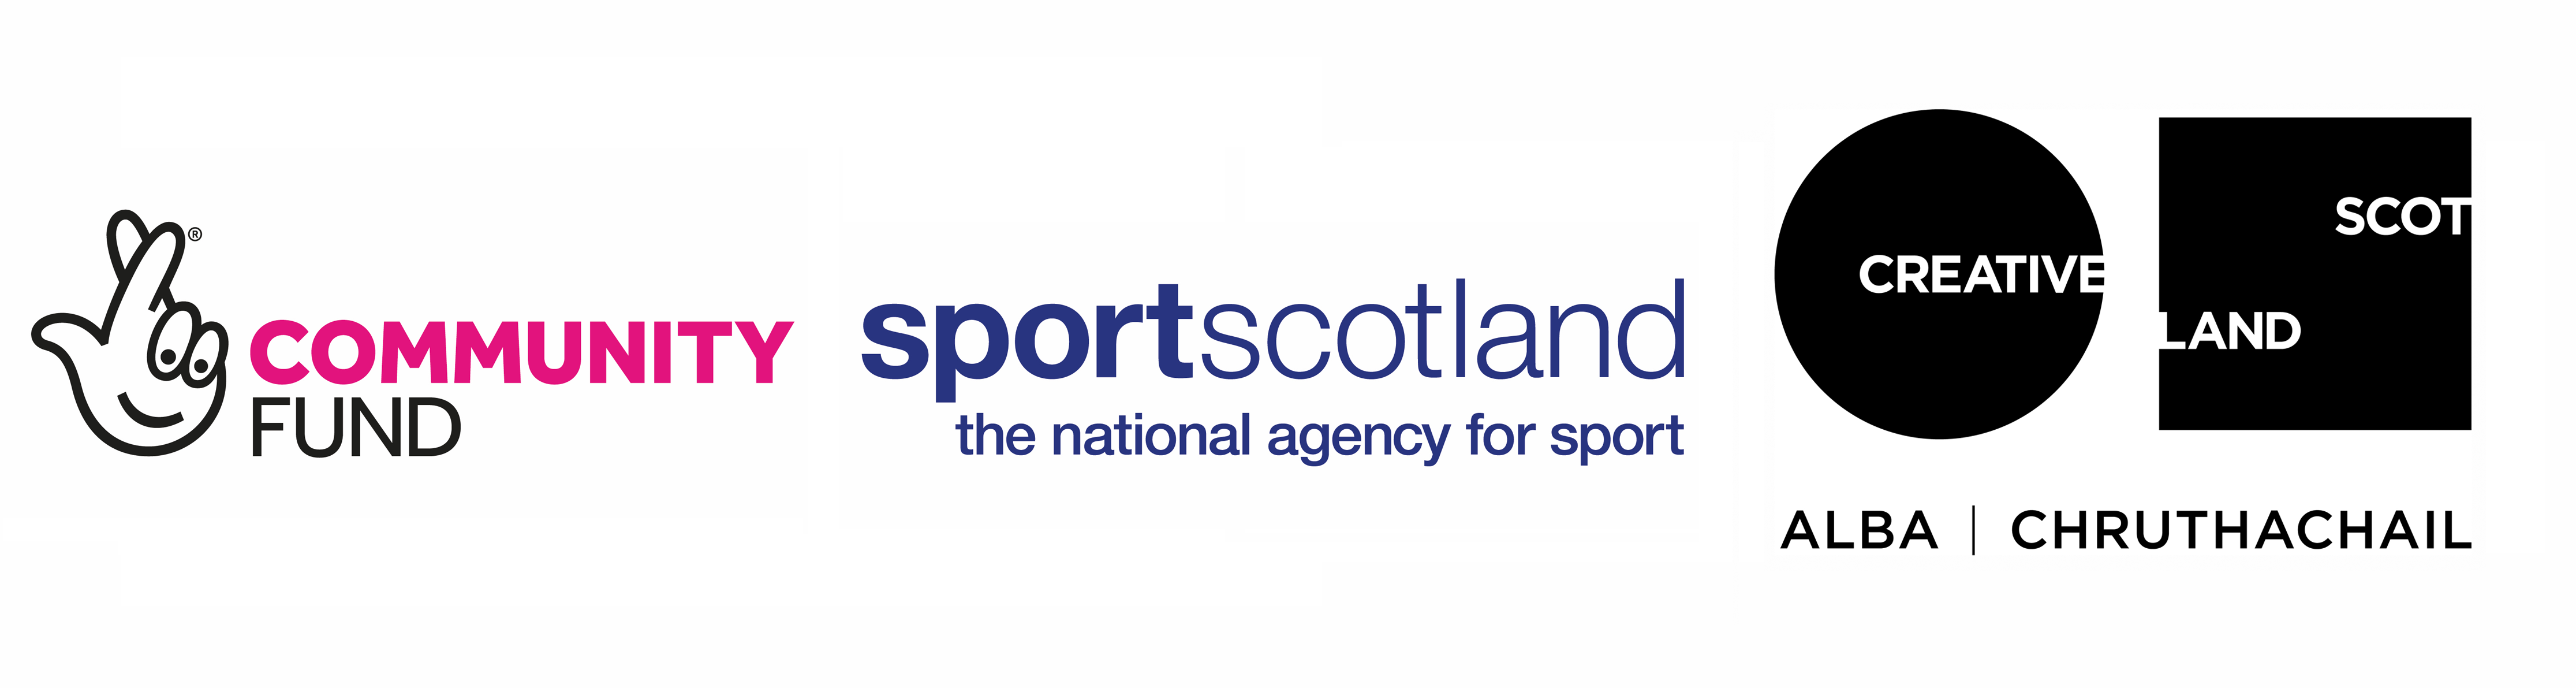 Logos for The National Lottery Community Fund, sport scotland and Creative Scotland.